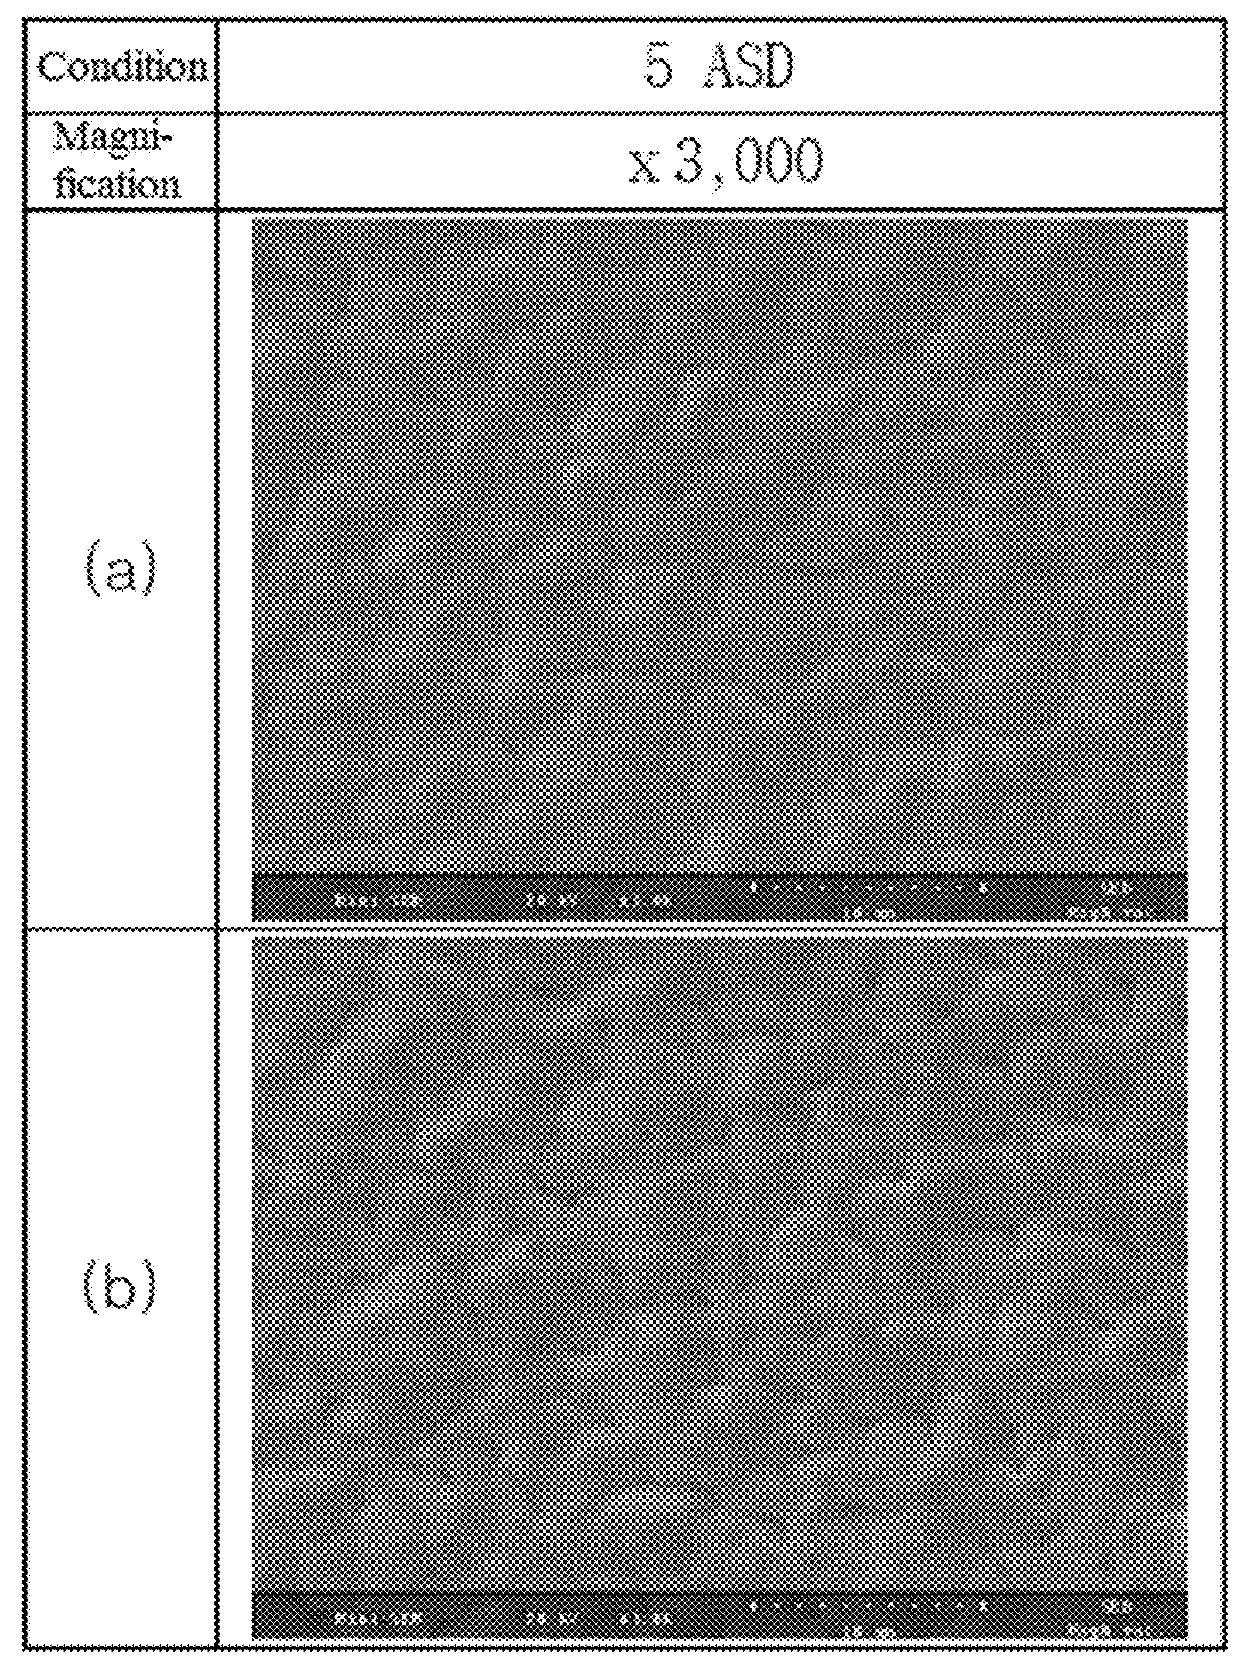 Tin alloy electroplating solution for solder bumps including perfluoroalkyl surfactant